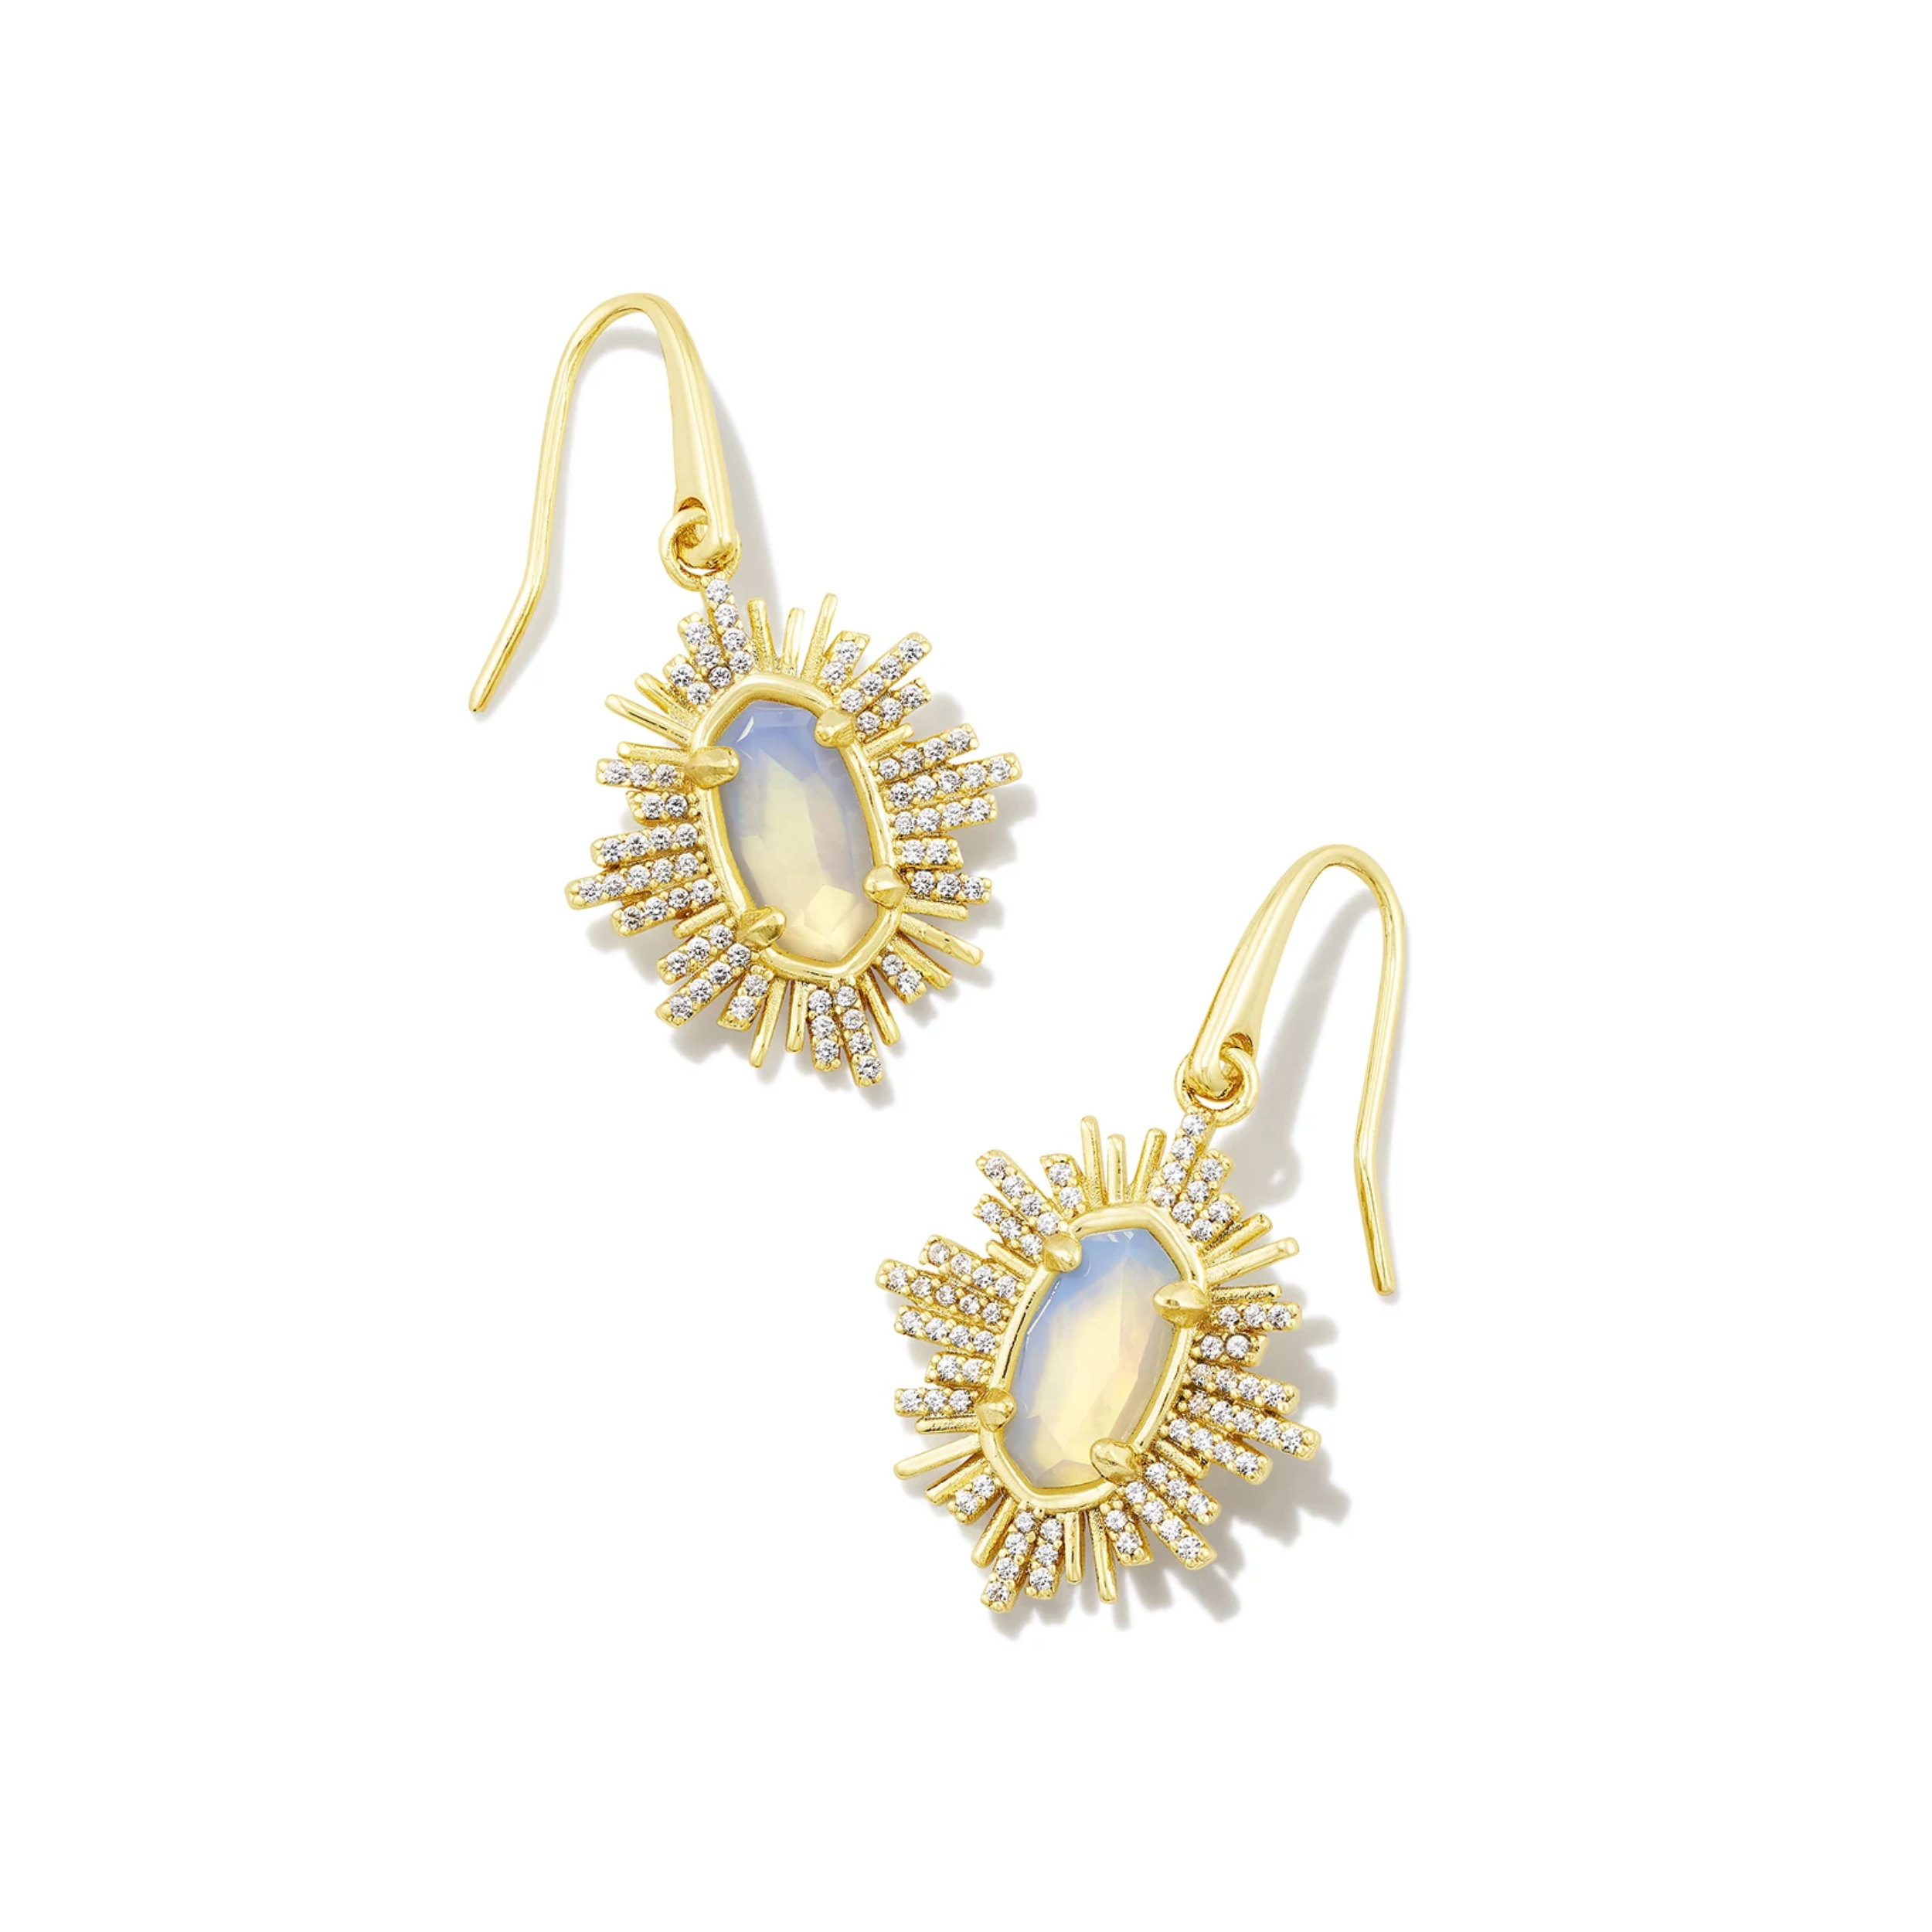 These Grayson Sunburst Gold Drop Earrings in Iridescent Opalite Illusion by Kendra Scott are picture on a white background.